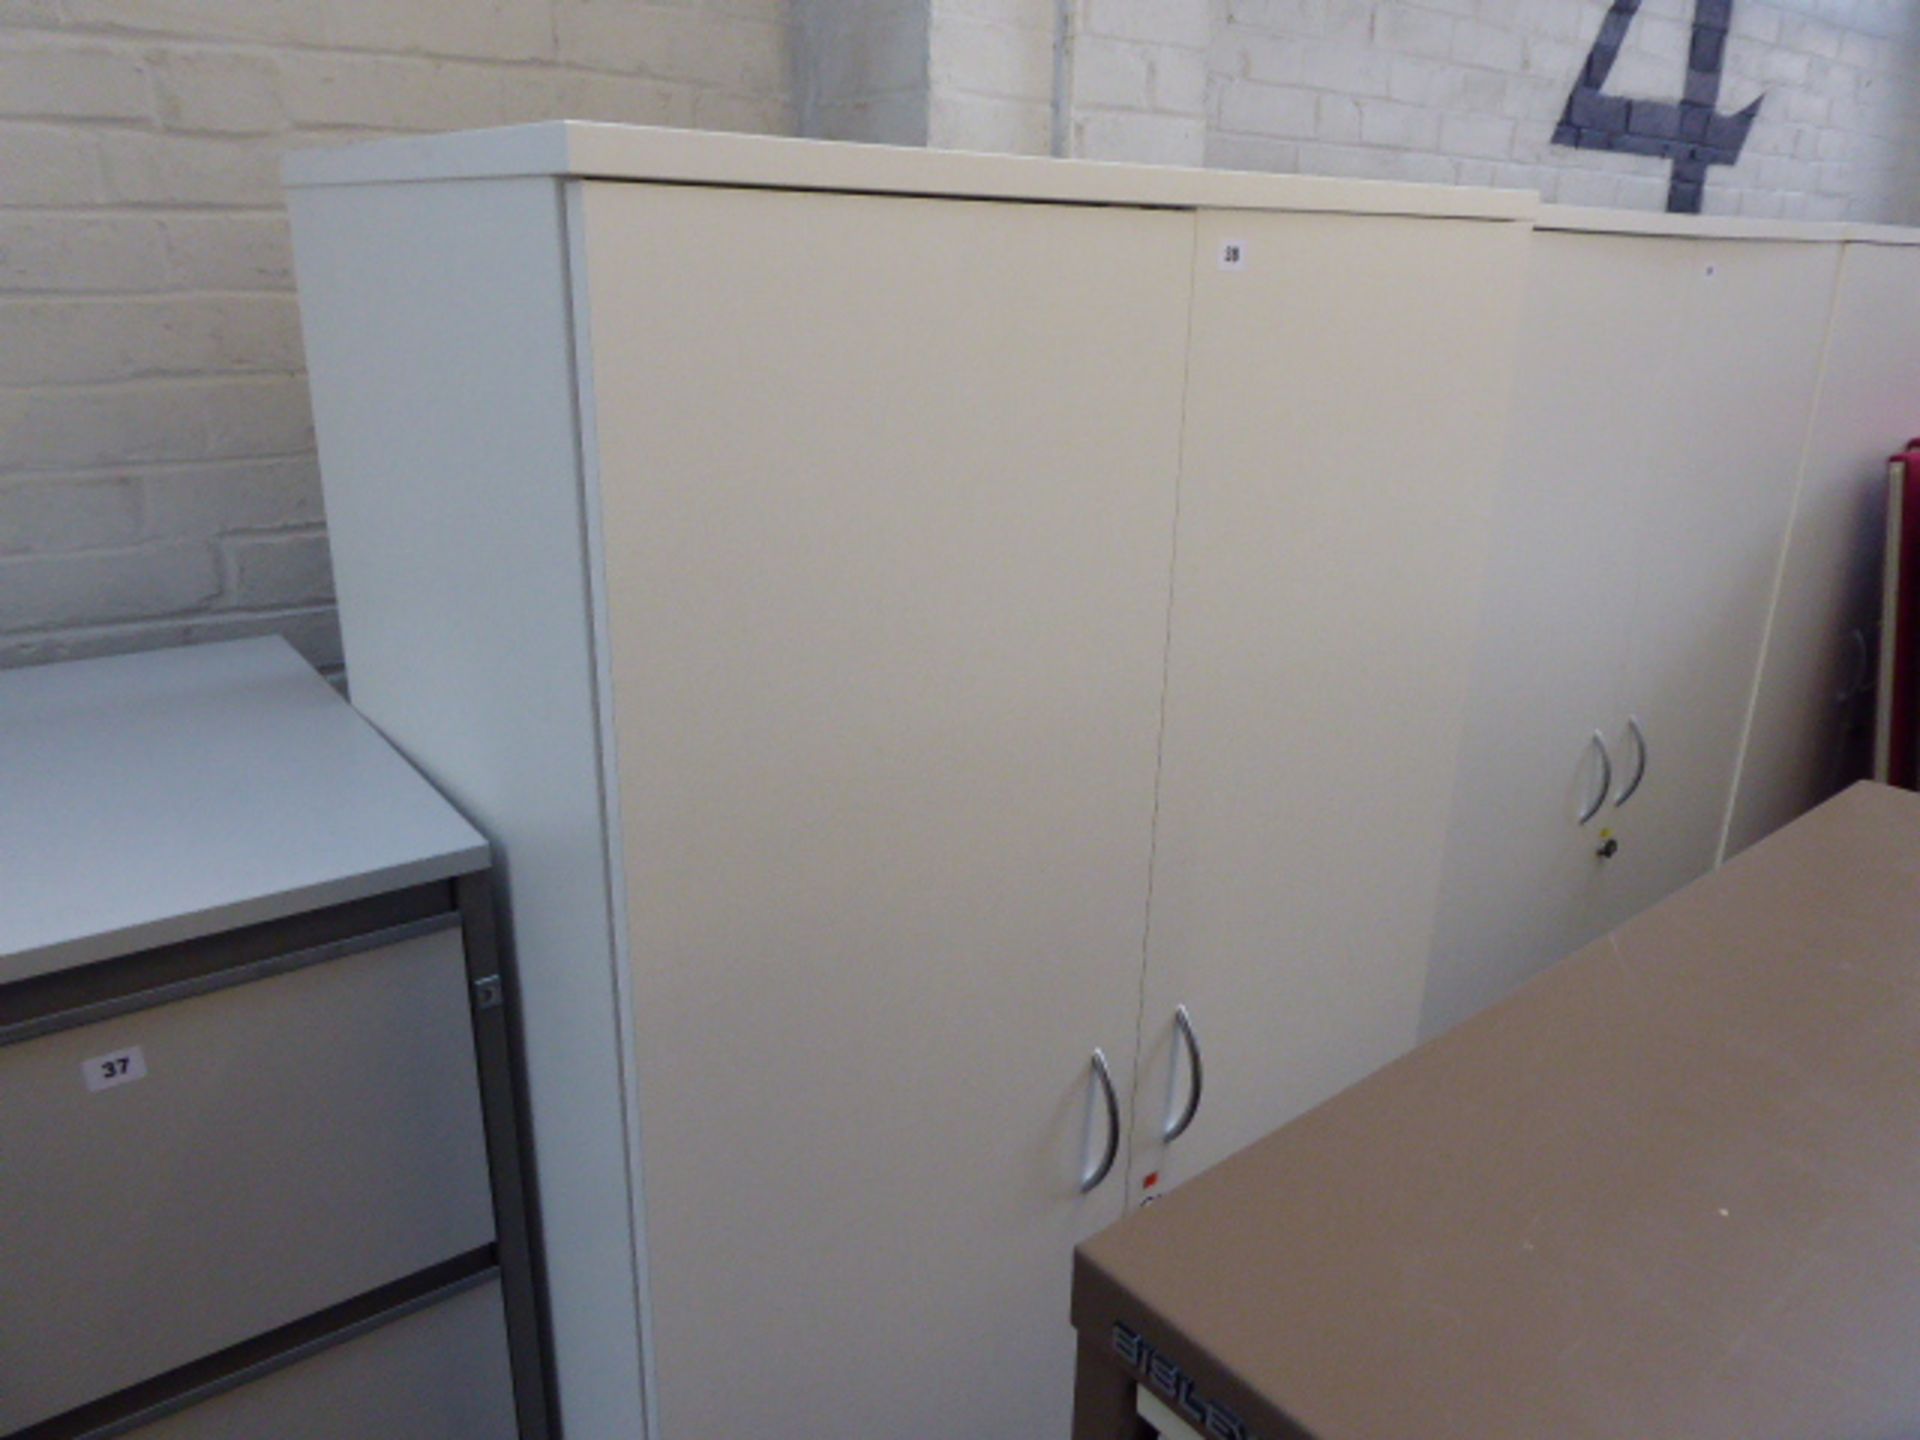 95cm by 180cm tall 2 door stationary cabinet